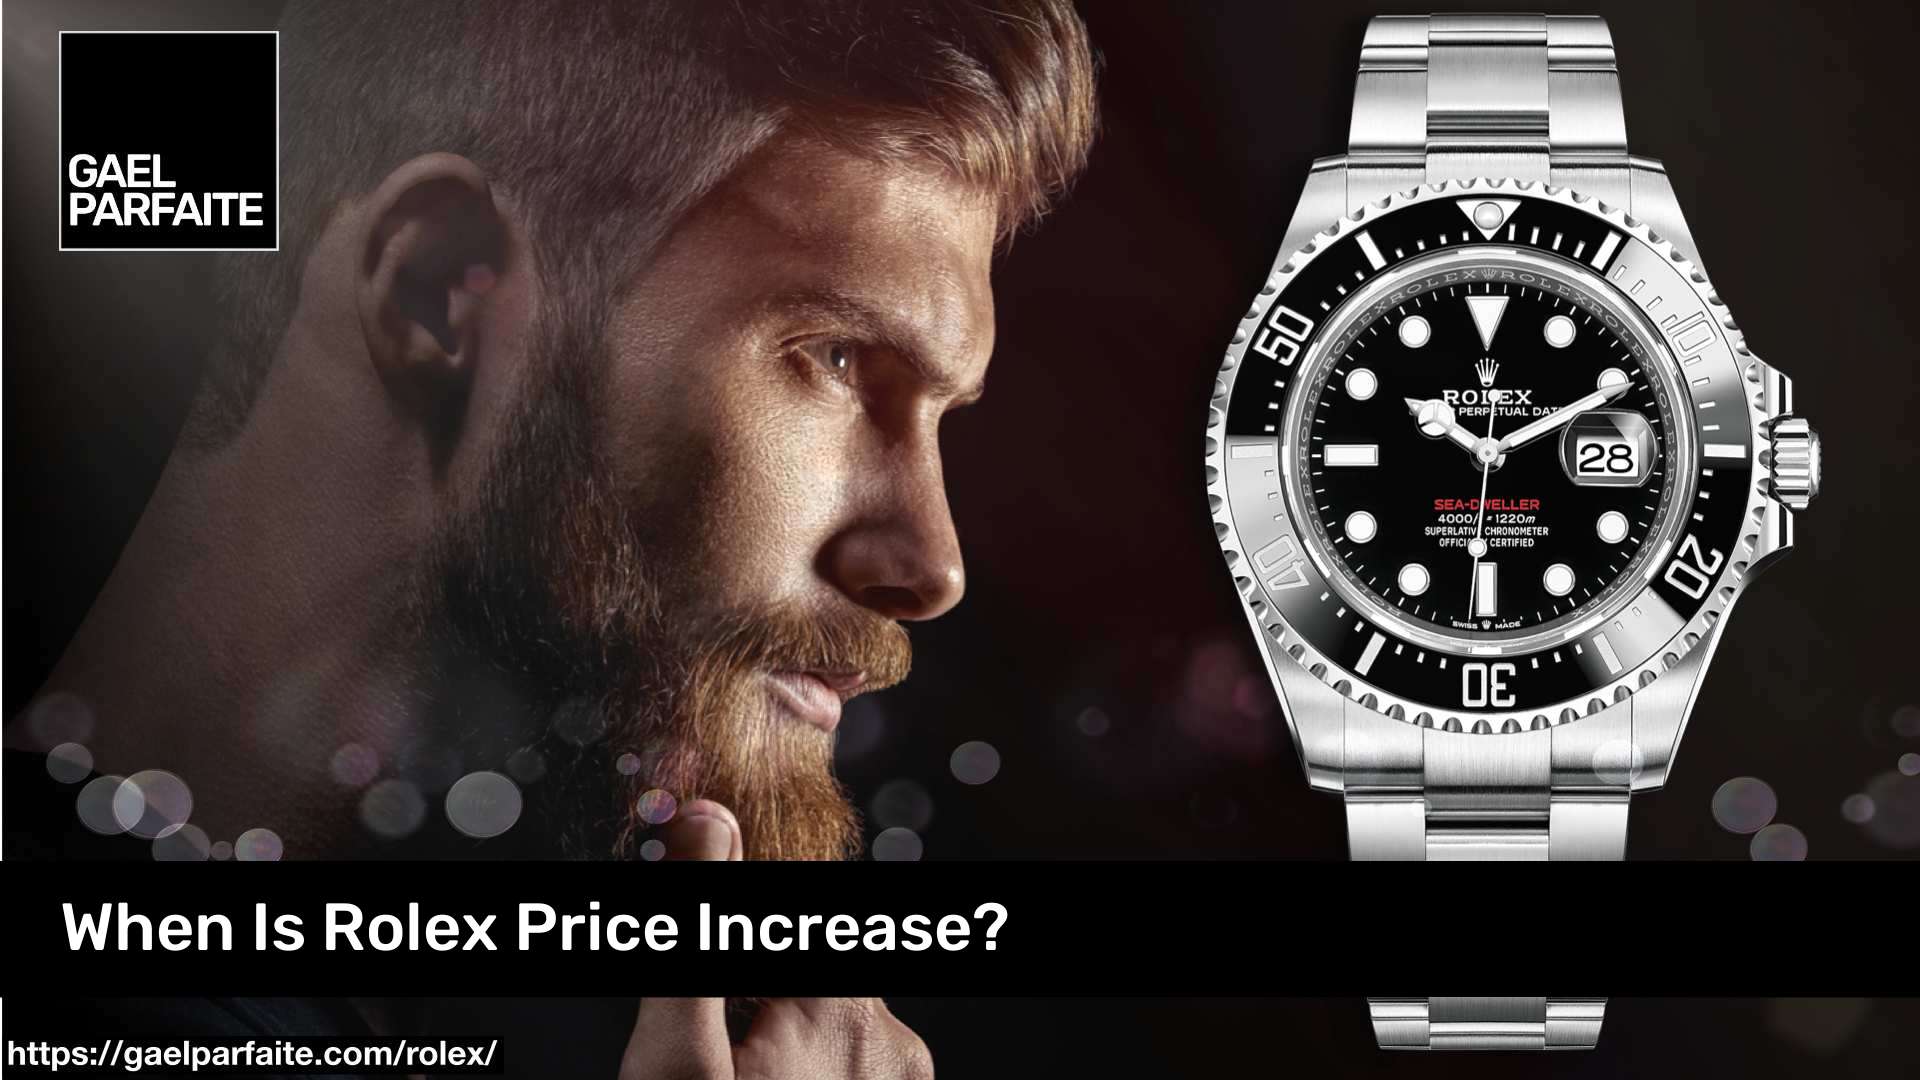 When Is Rolex Price Increase?